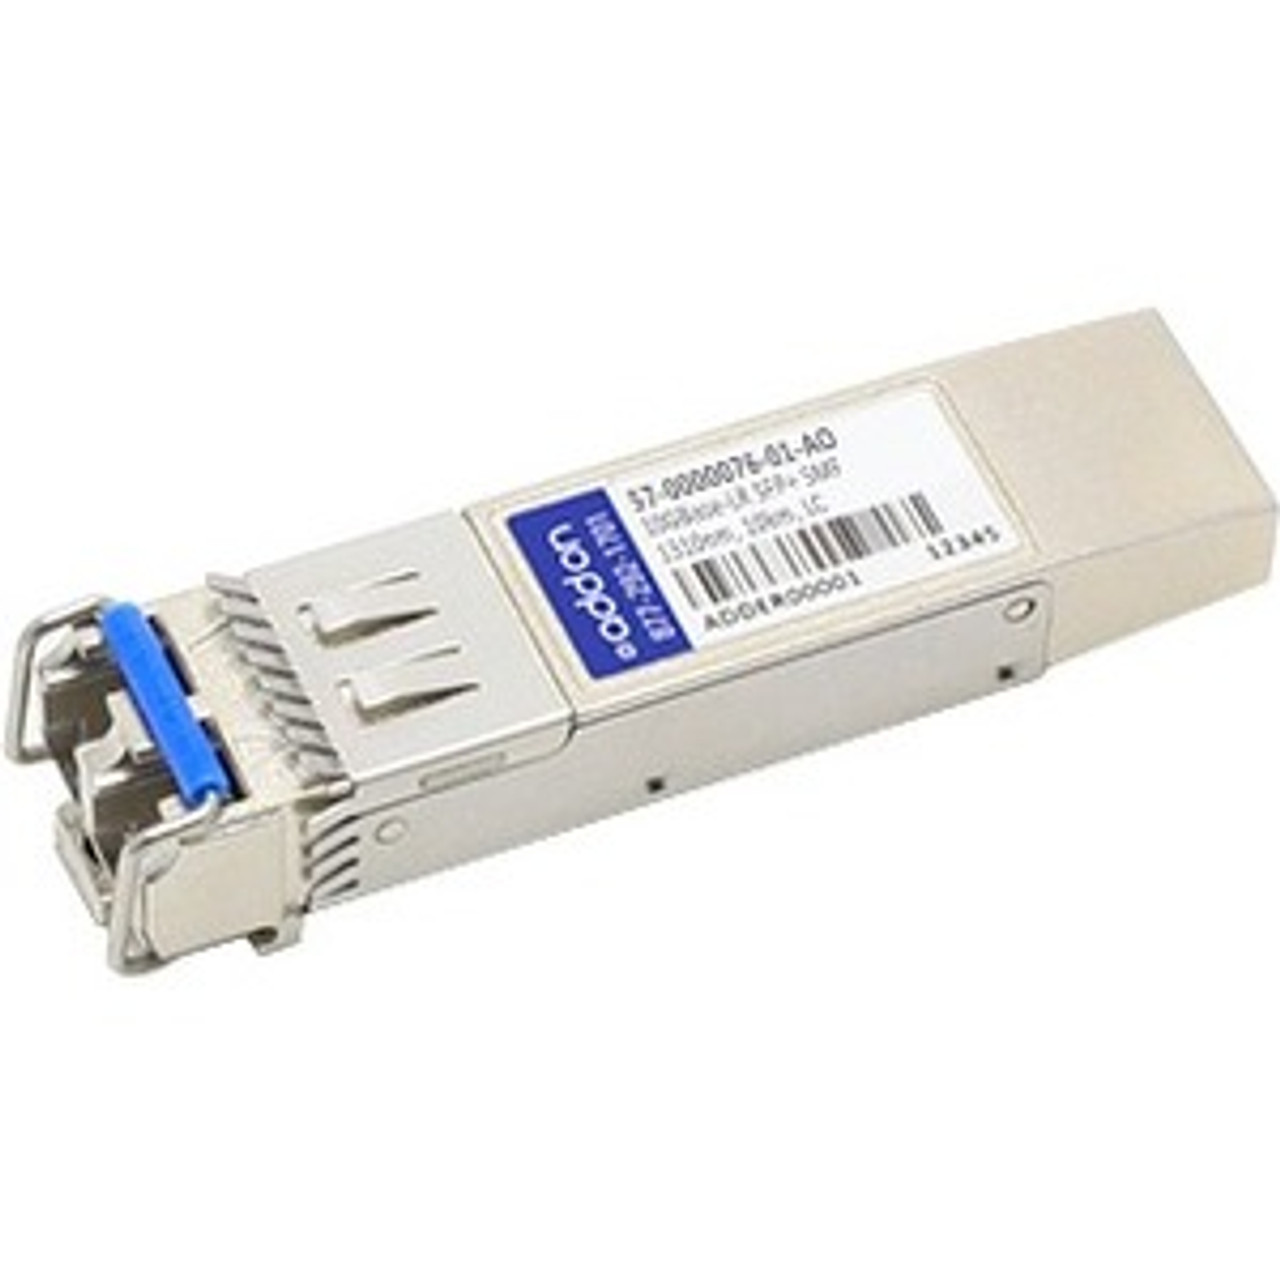 57-0000076-01-AO AddOn 10Gbps 10GBase-LR Single-mode Fiber 10km 1310nm LC Connector SFP+ Transceiver Module for Brocade Compatible